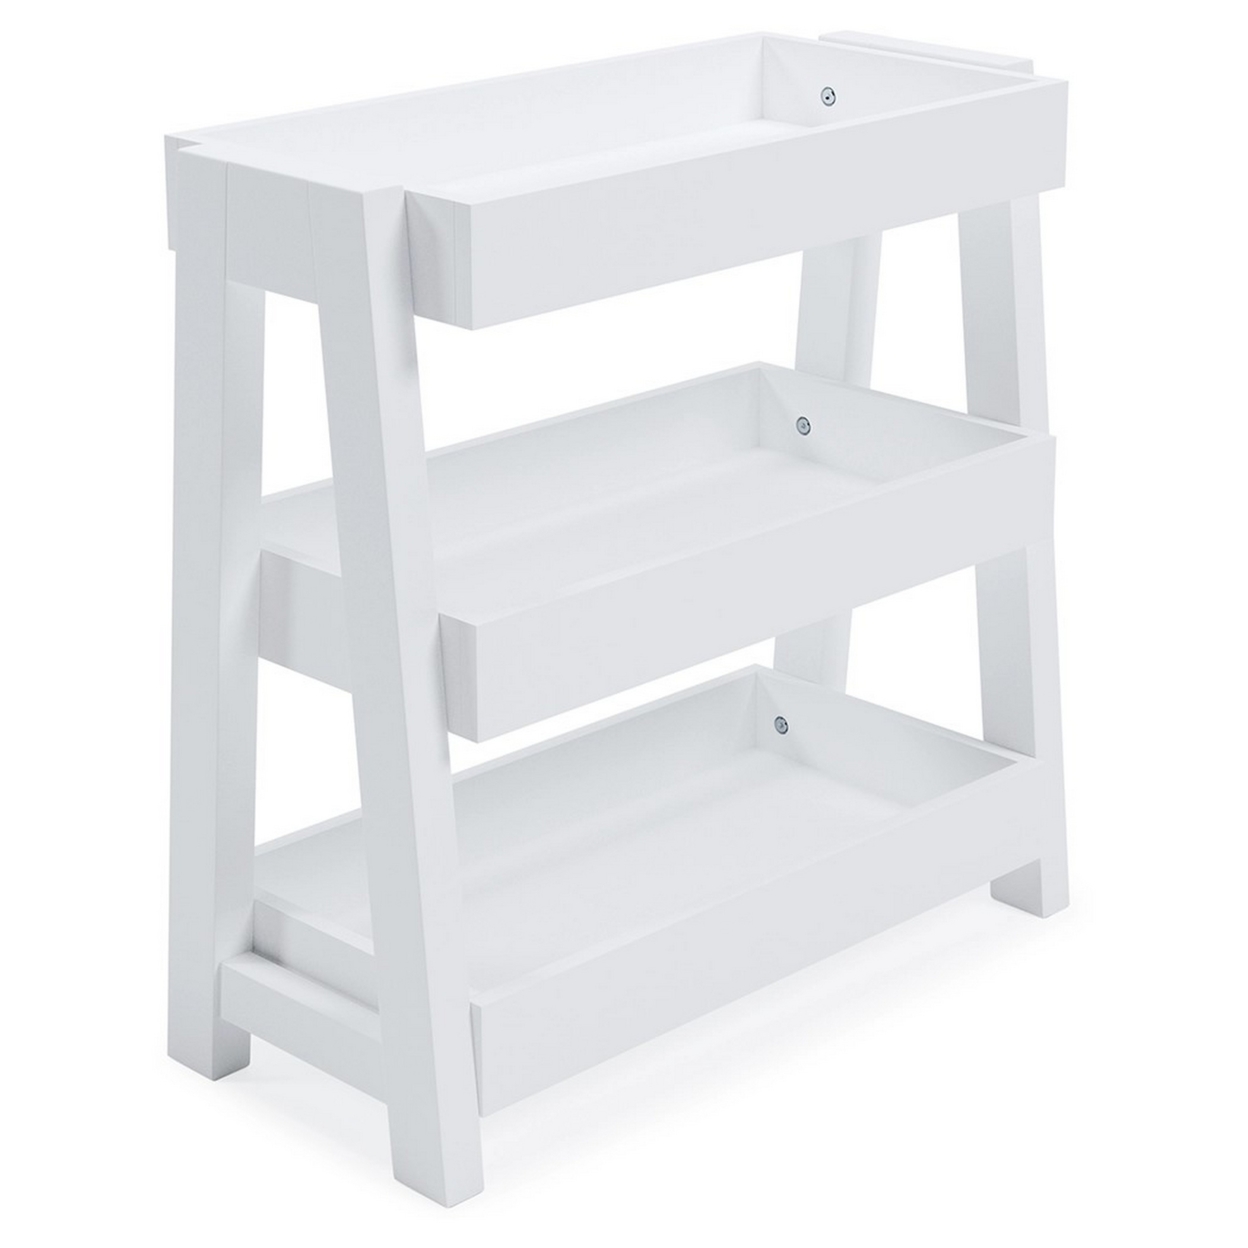 Accent Table With 3 Tier Tray Design Shelves, White- Saltoro Sherpi